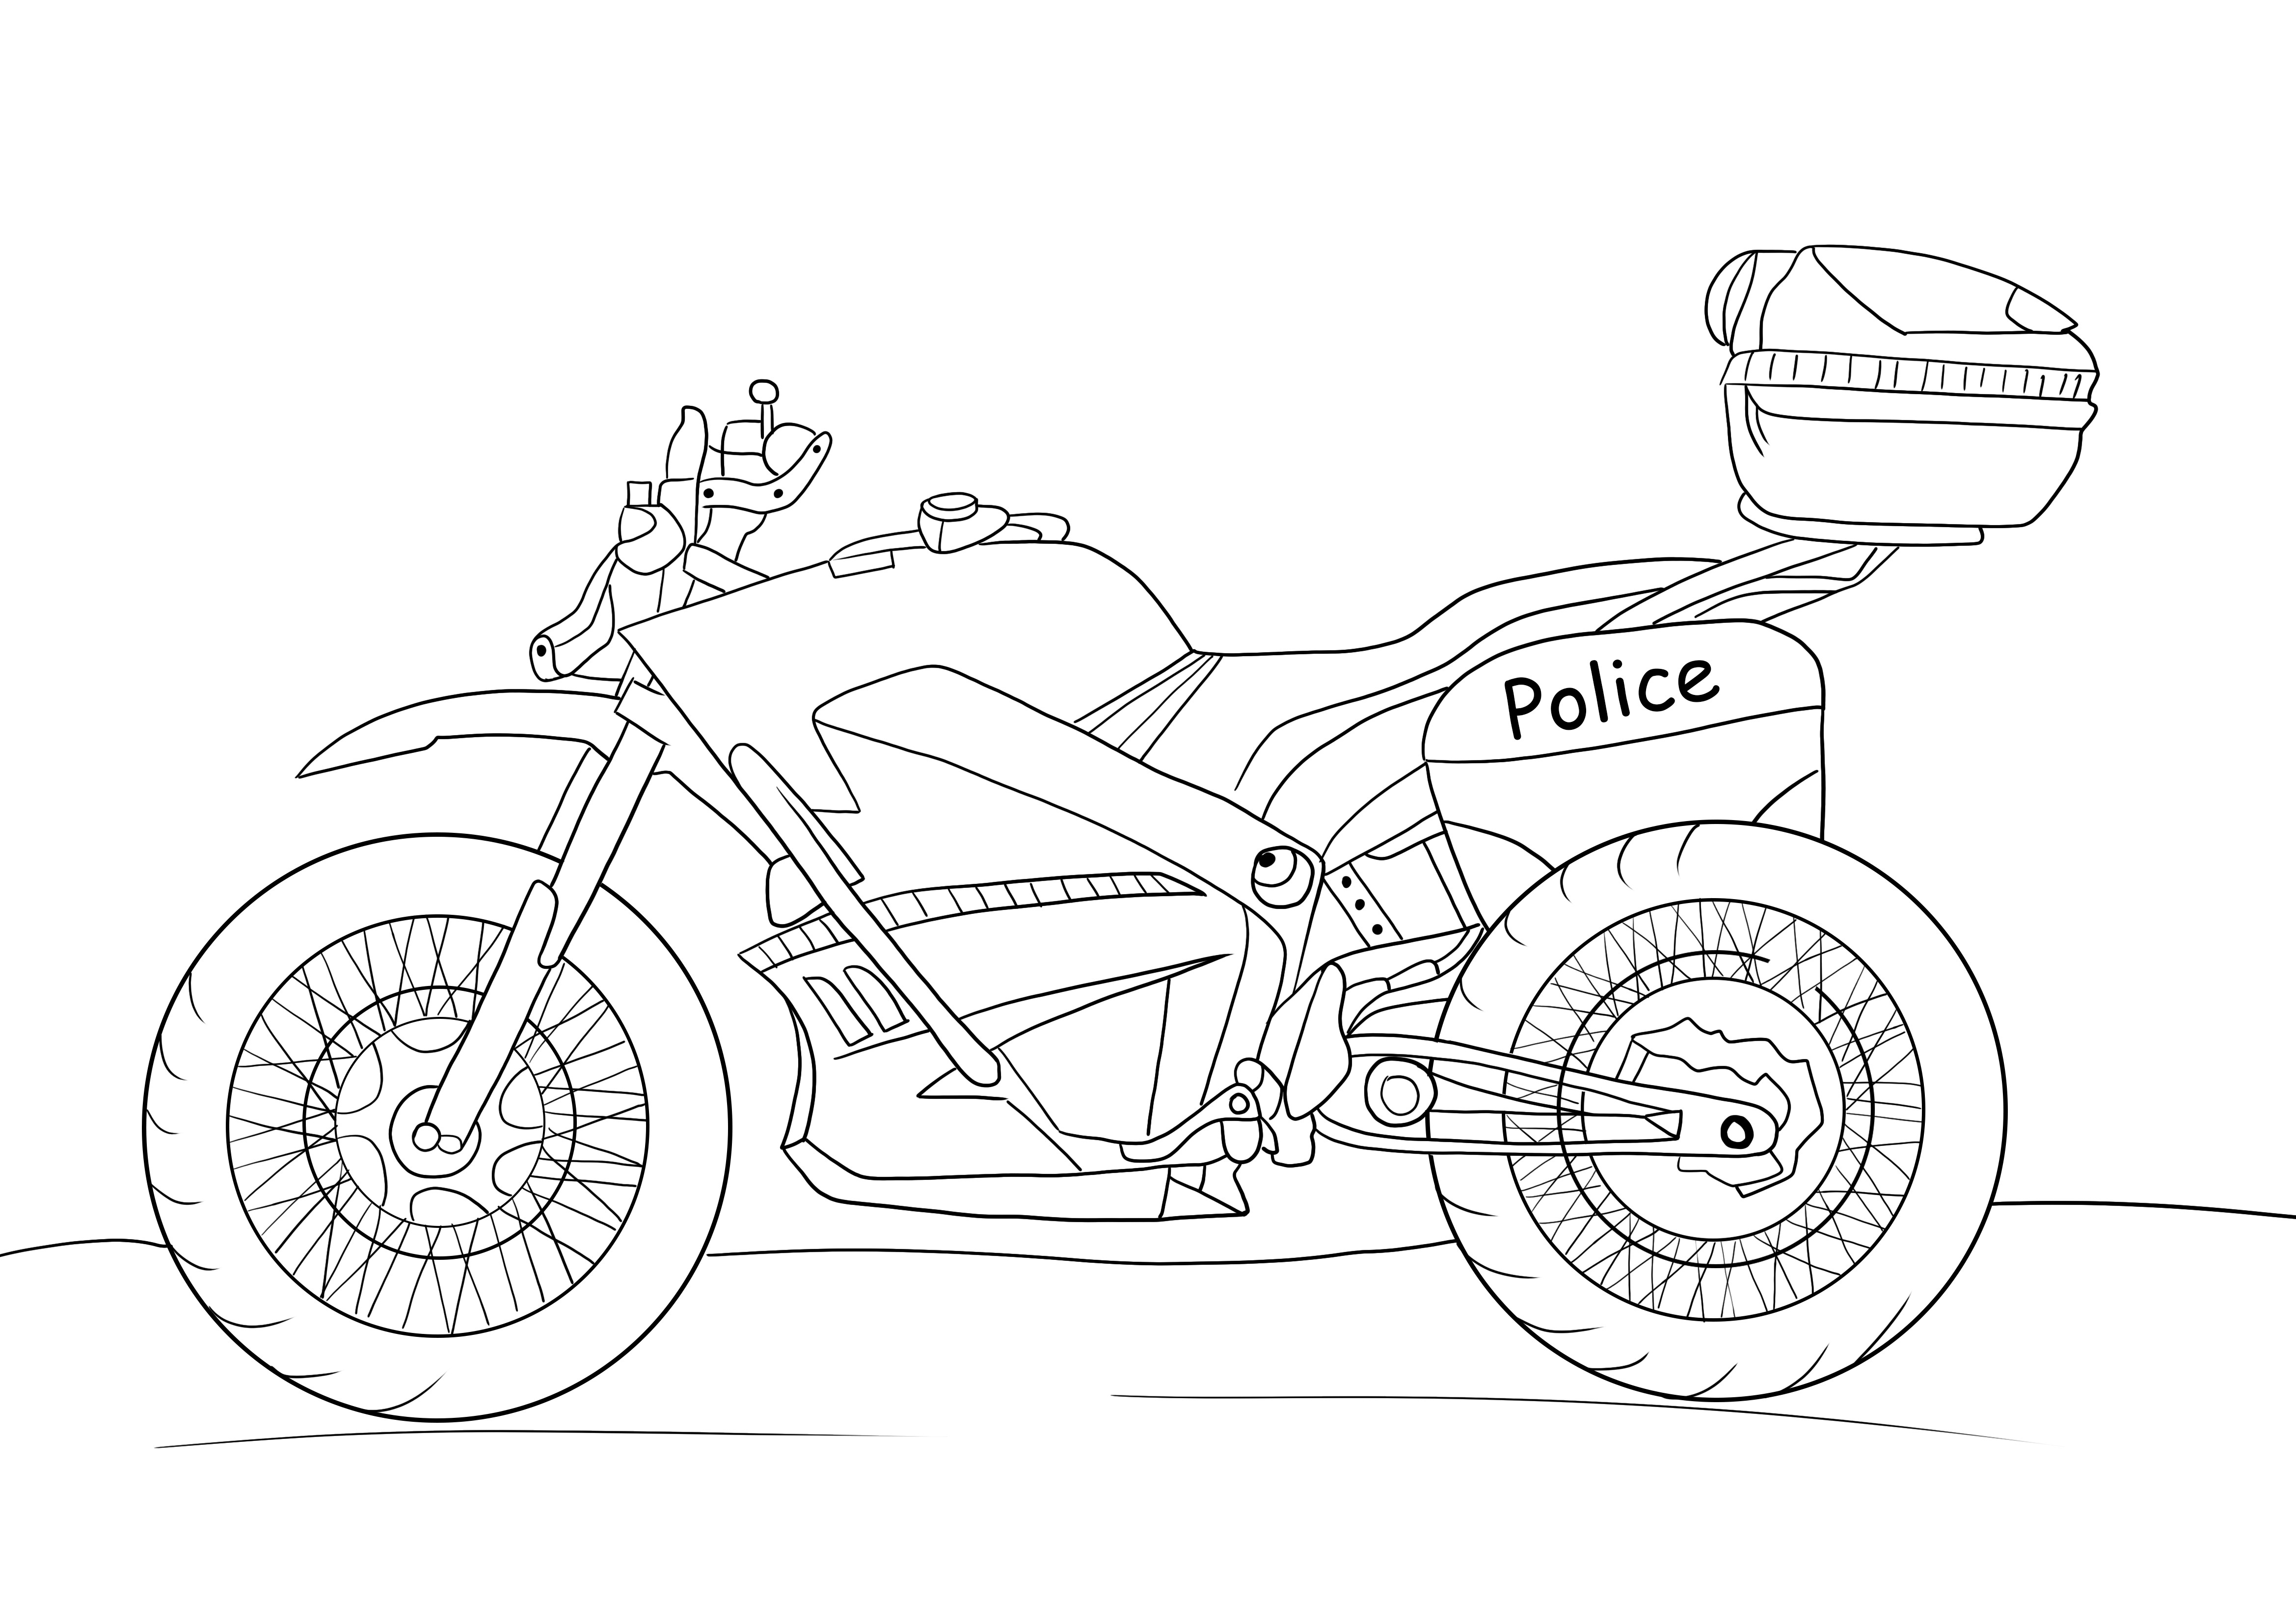 Police motorcycle free printing sheet for kids to color